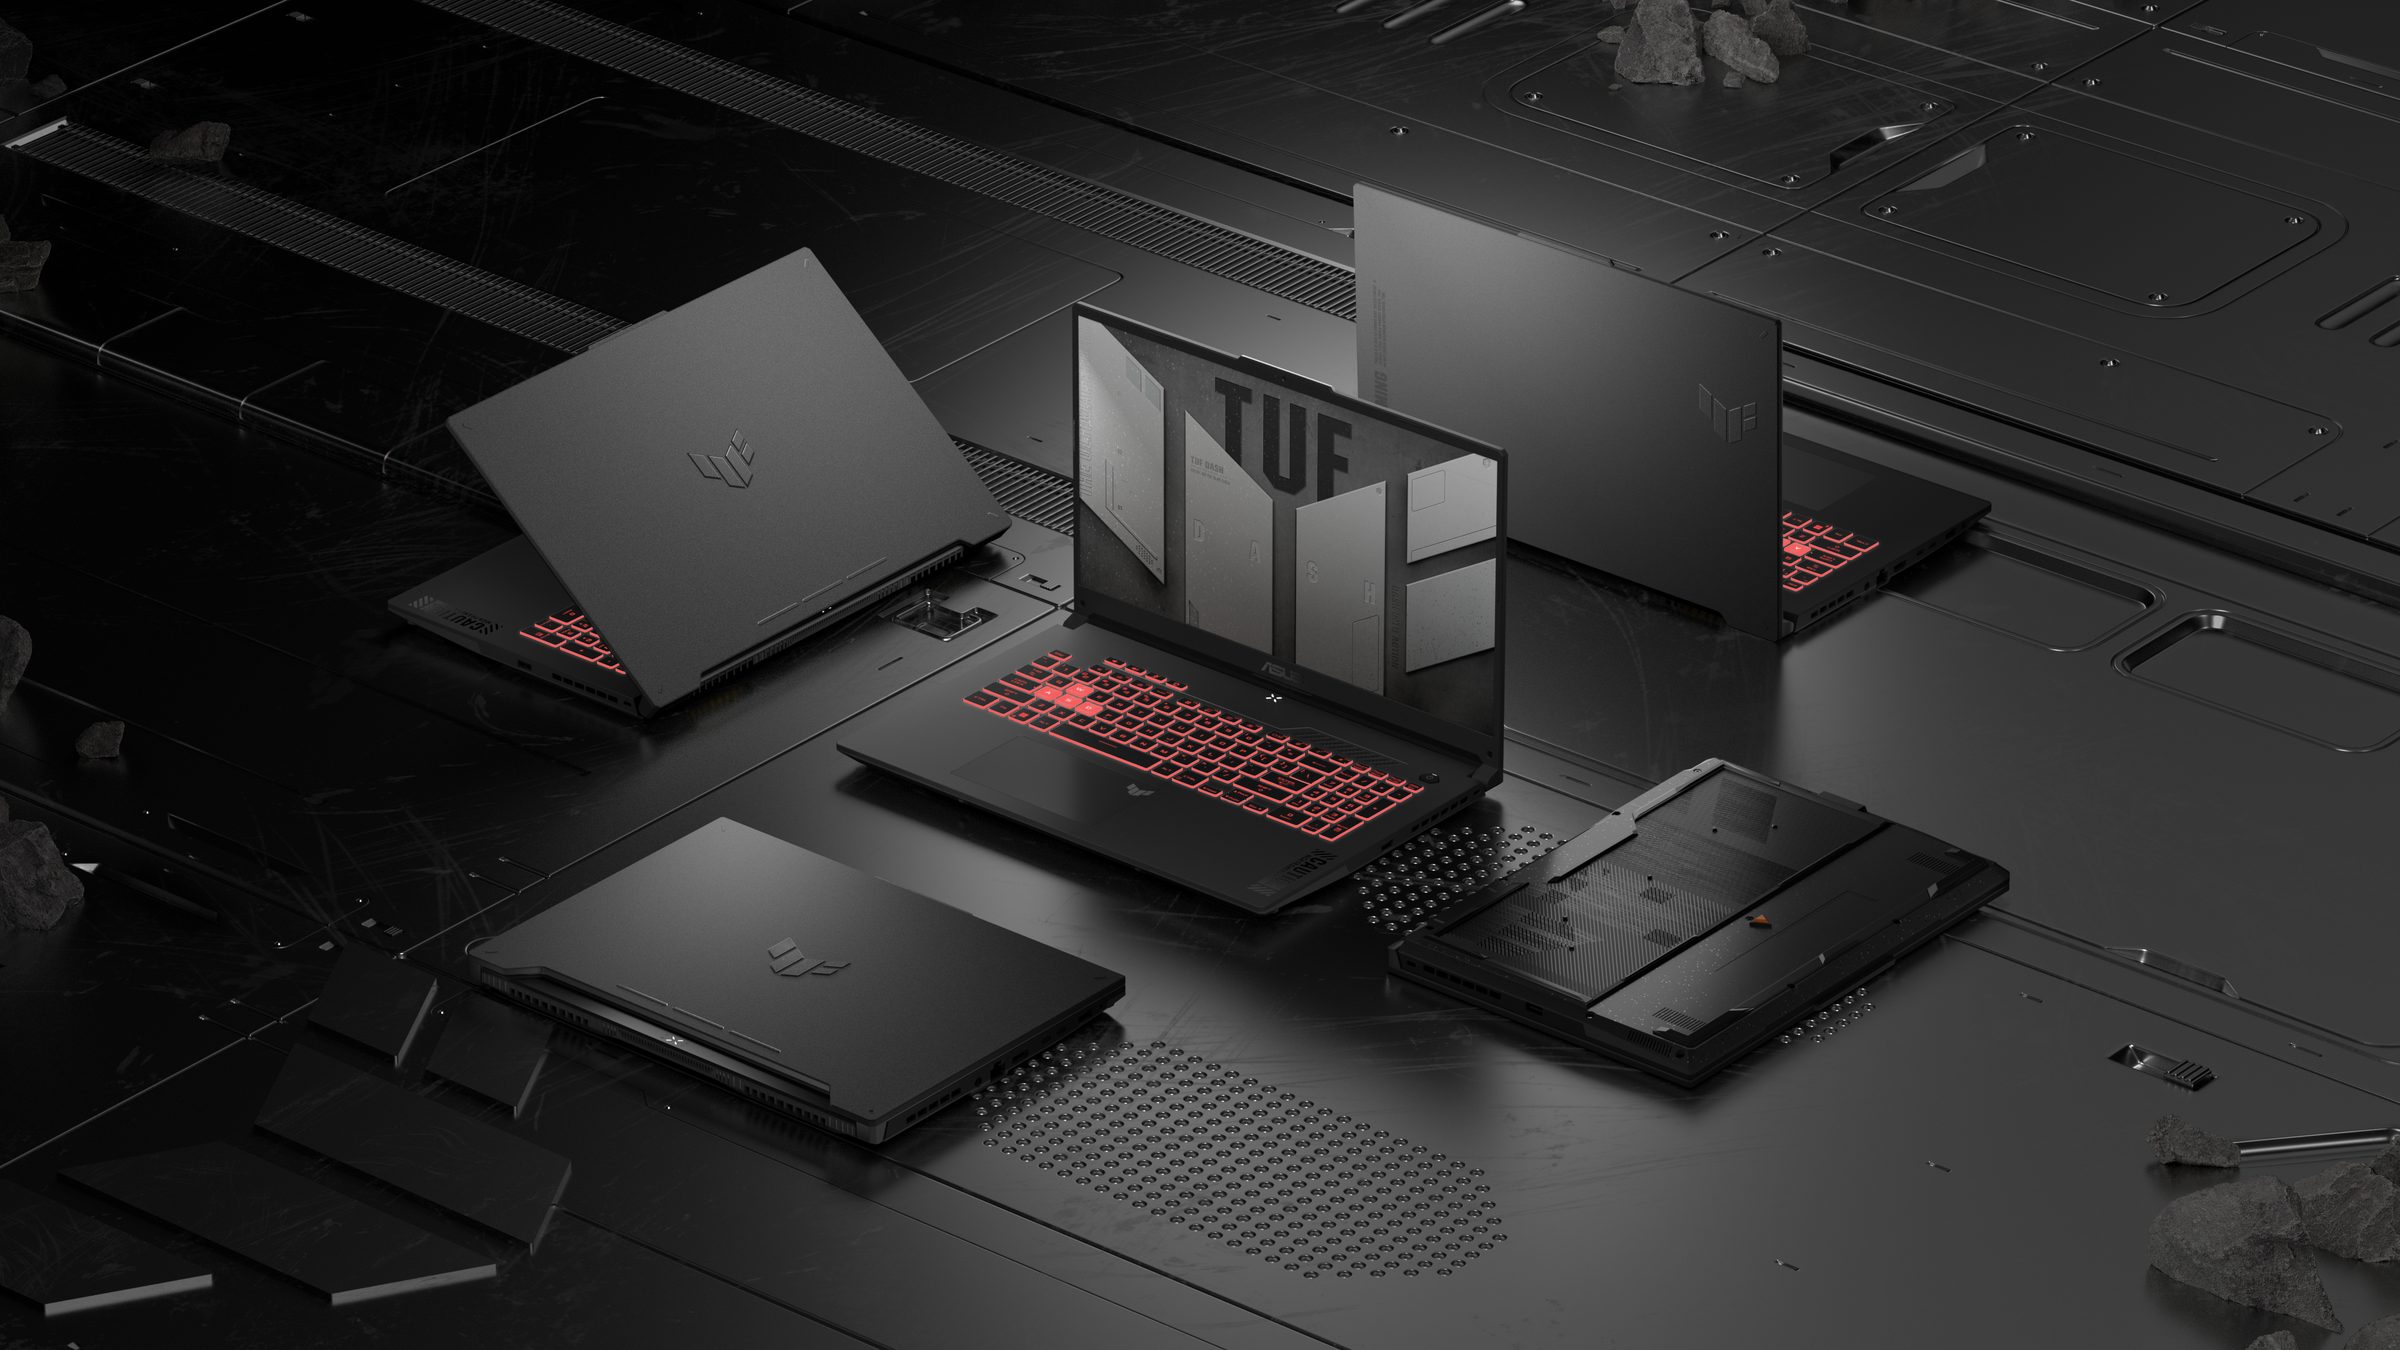 Five Asus TUF laptops arranged in a grid on a black table.